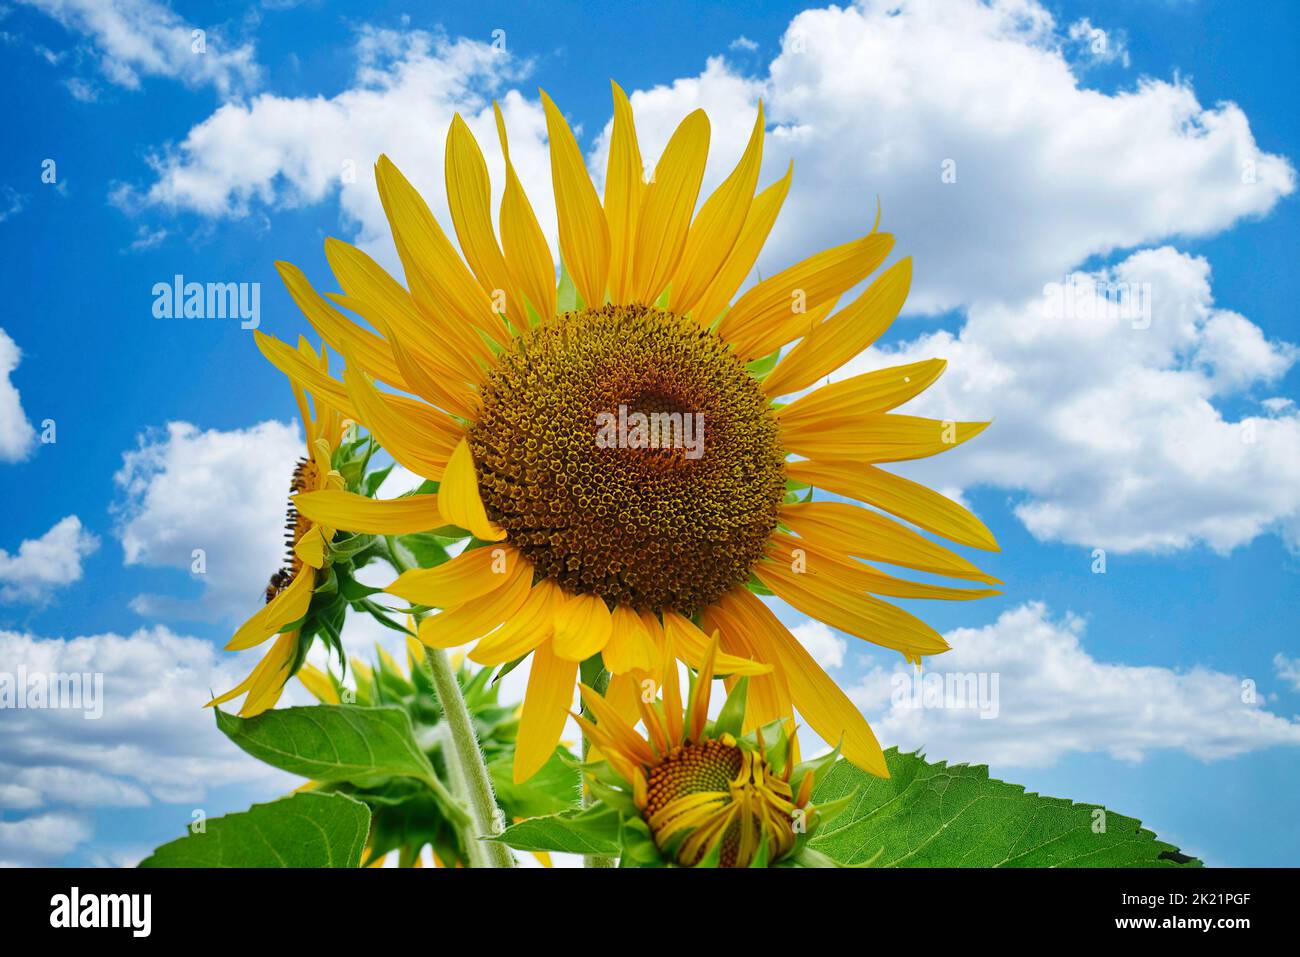 One sunflower against blue sky without people Stock Photo